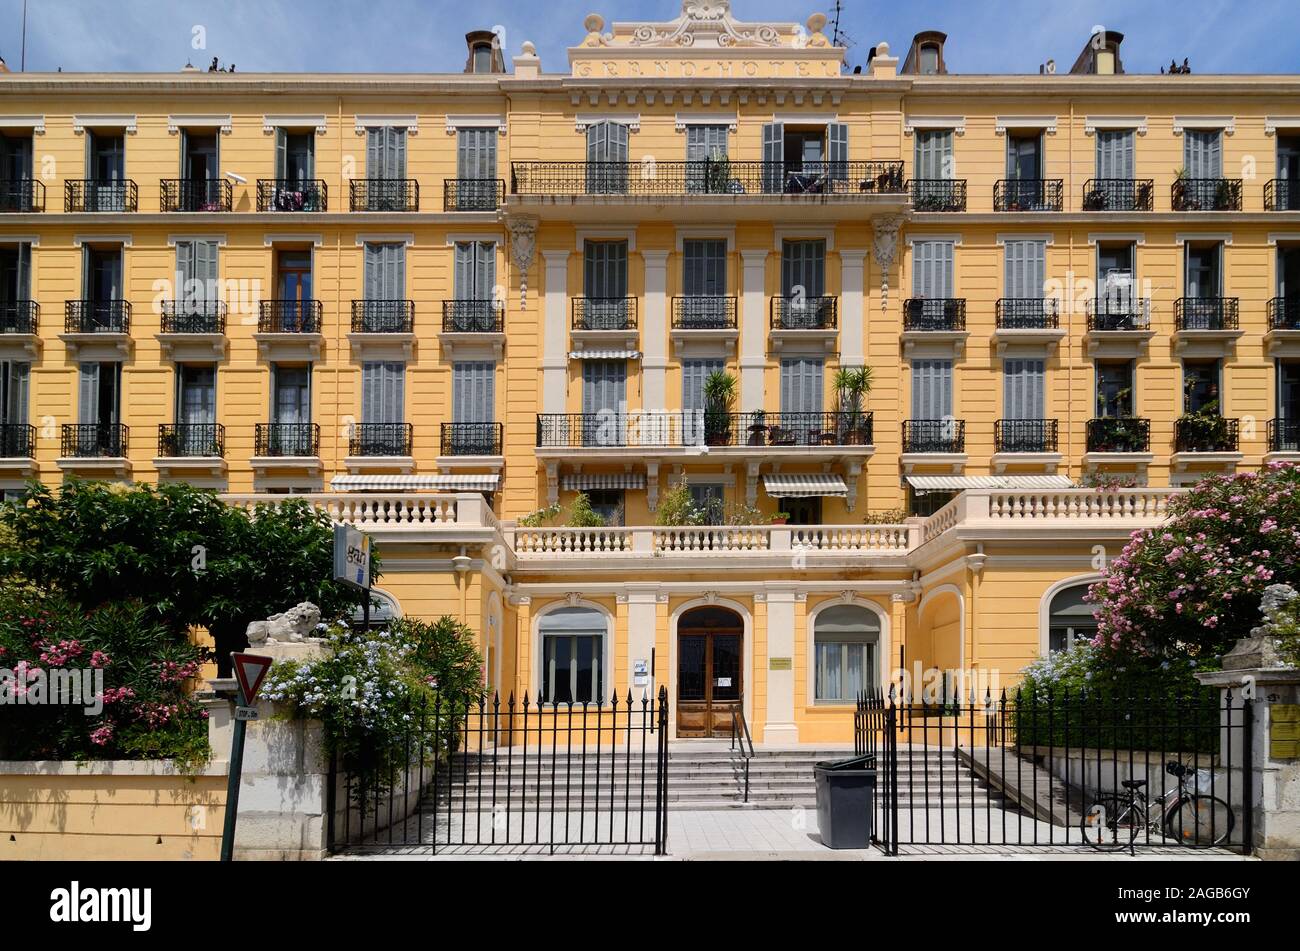 The former Belle Epoque luxury Grand Hotel (1850), converted to luxury apartments c1950, Hyères Var Provence France Stock Photo